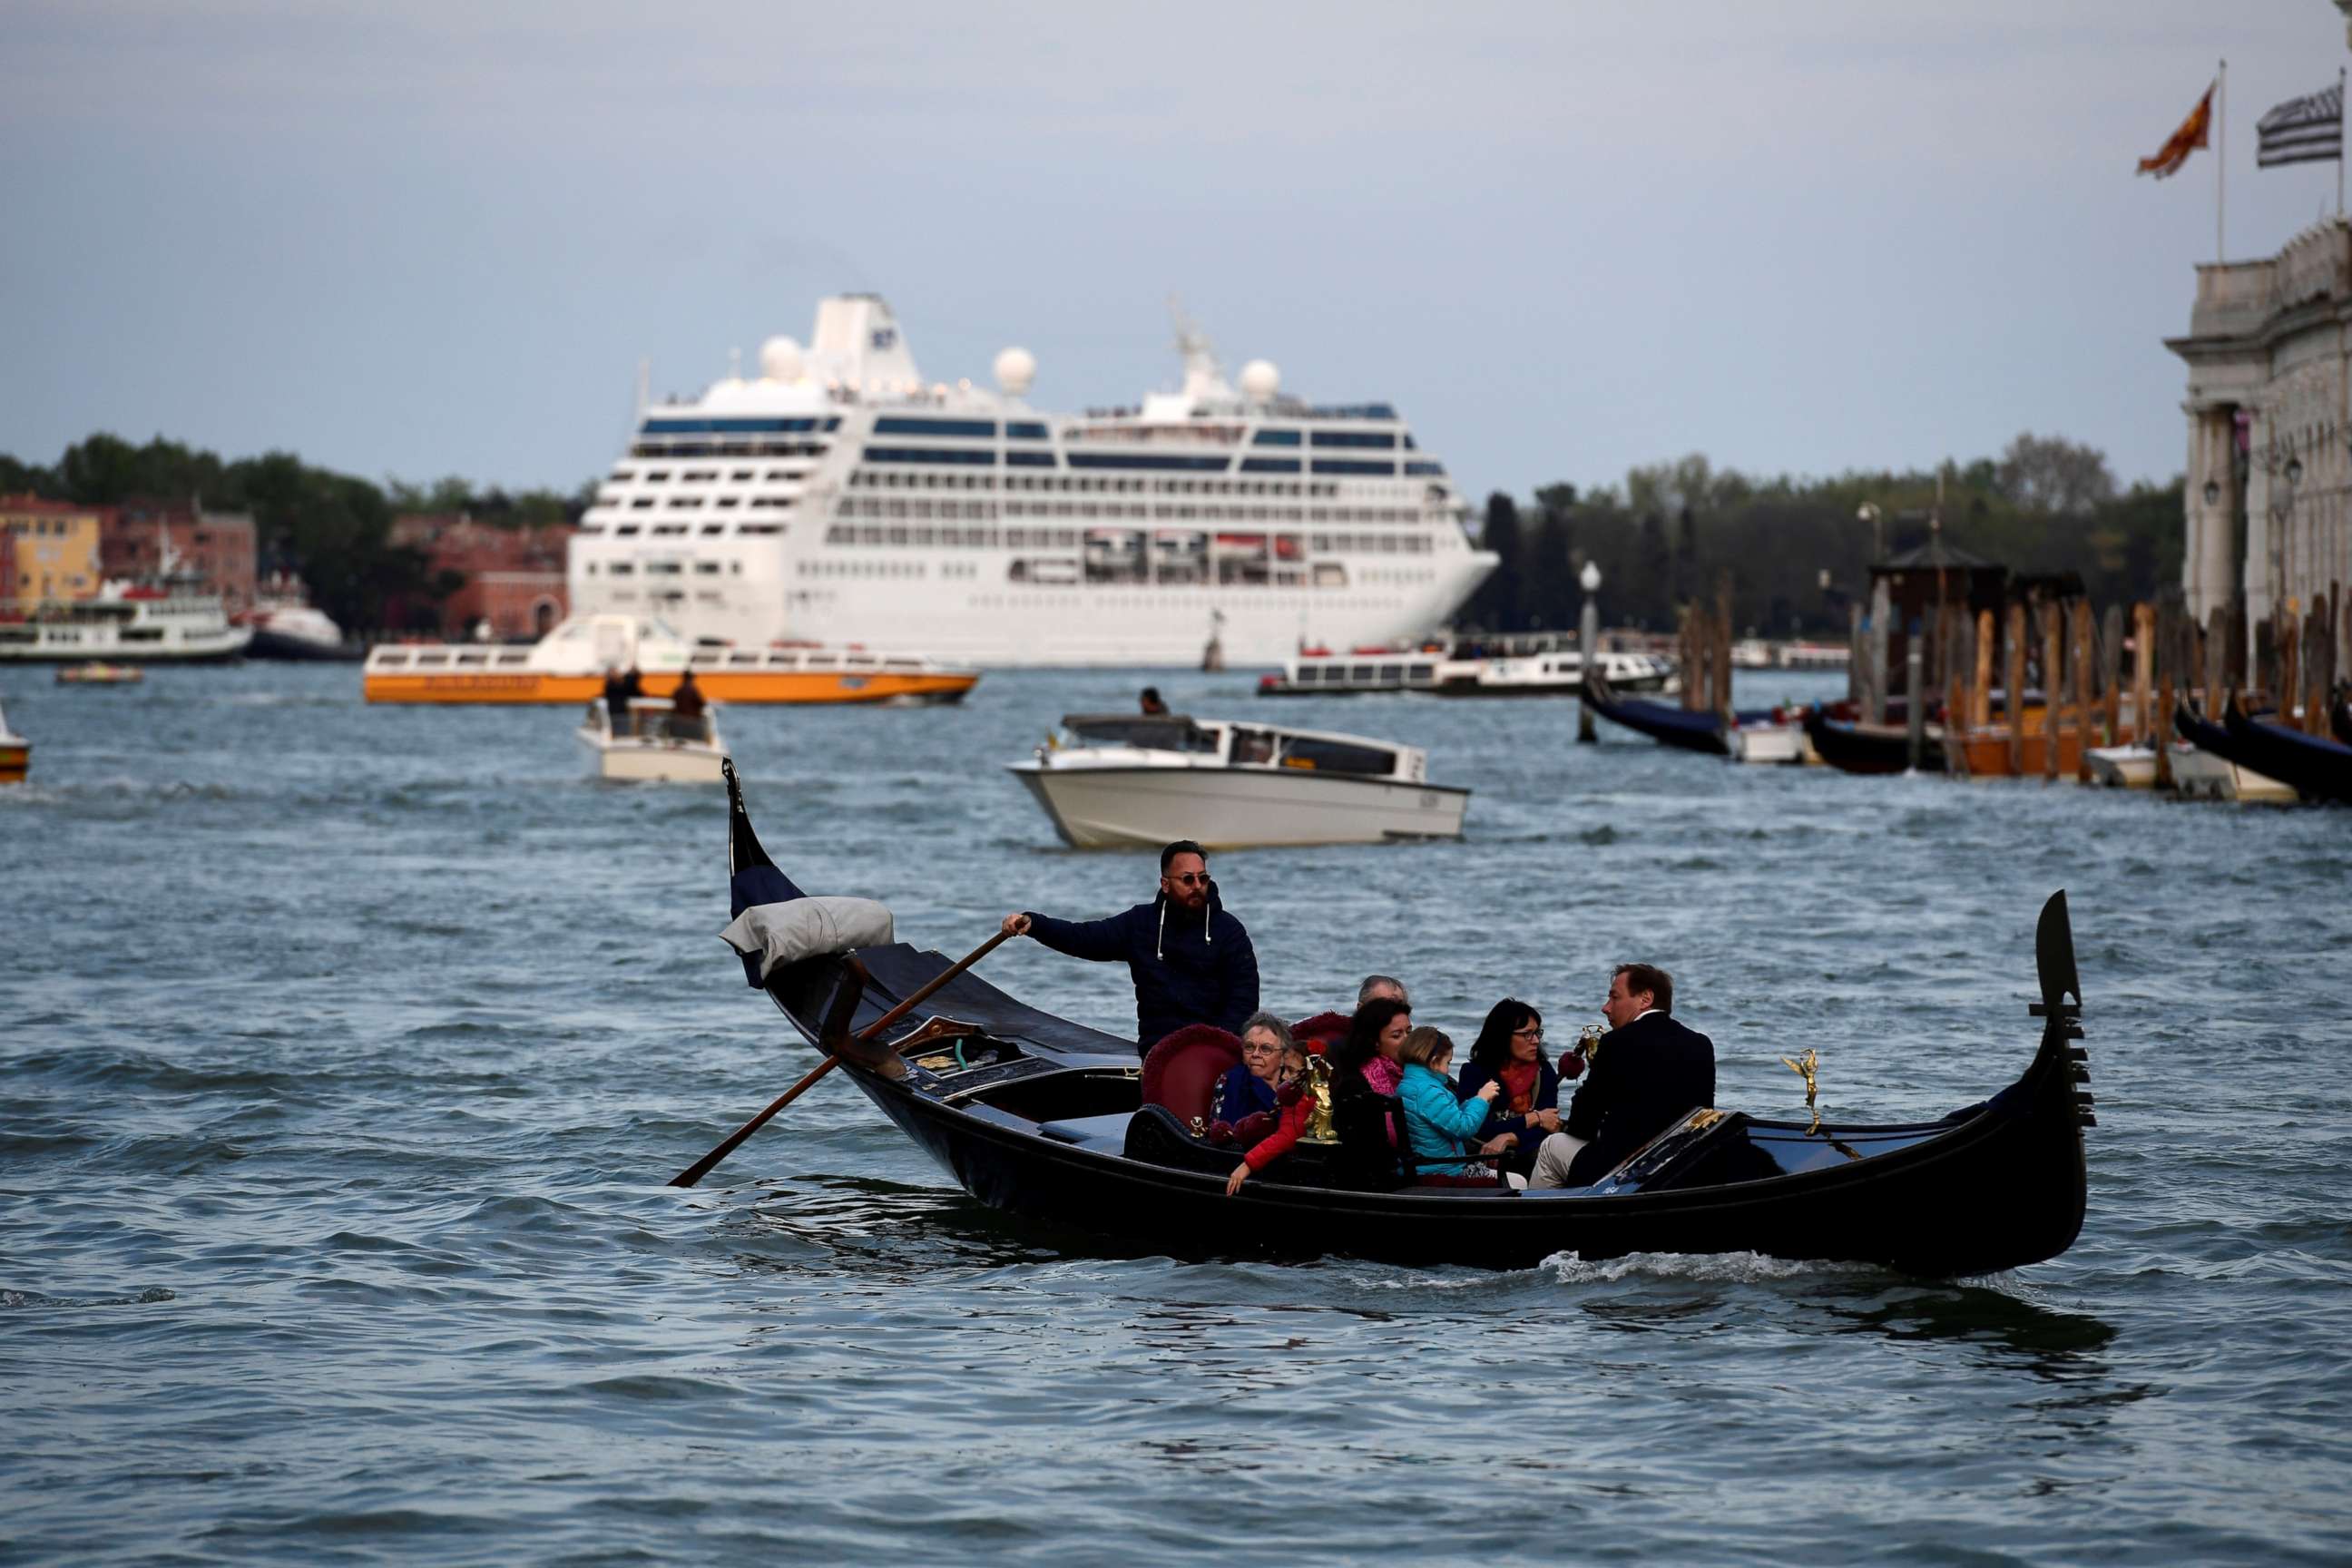 PHOTO: A cruise ship sits in the distance as a gondola with tourists navigates the Grand Canal in Venice on April 7, 2017.